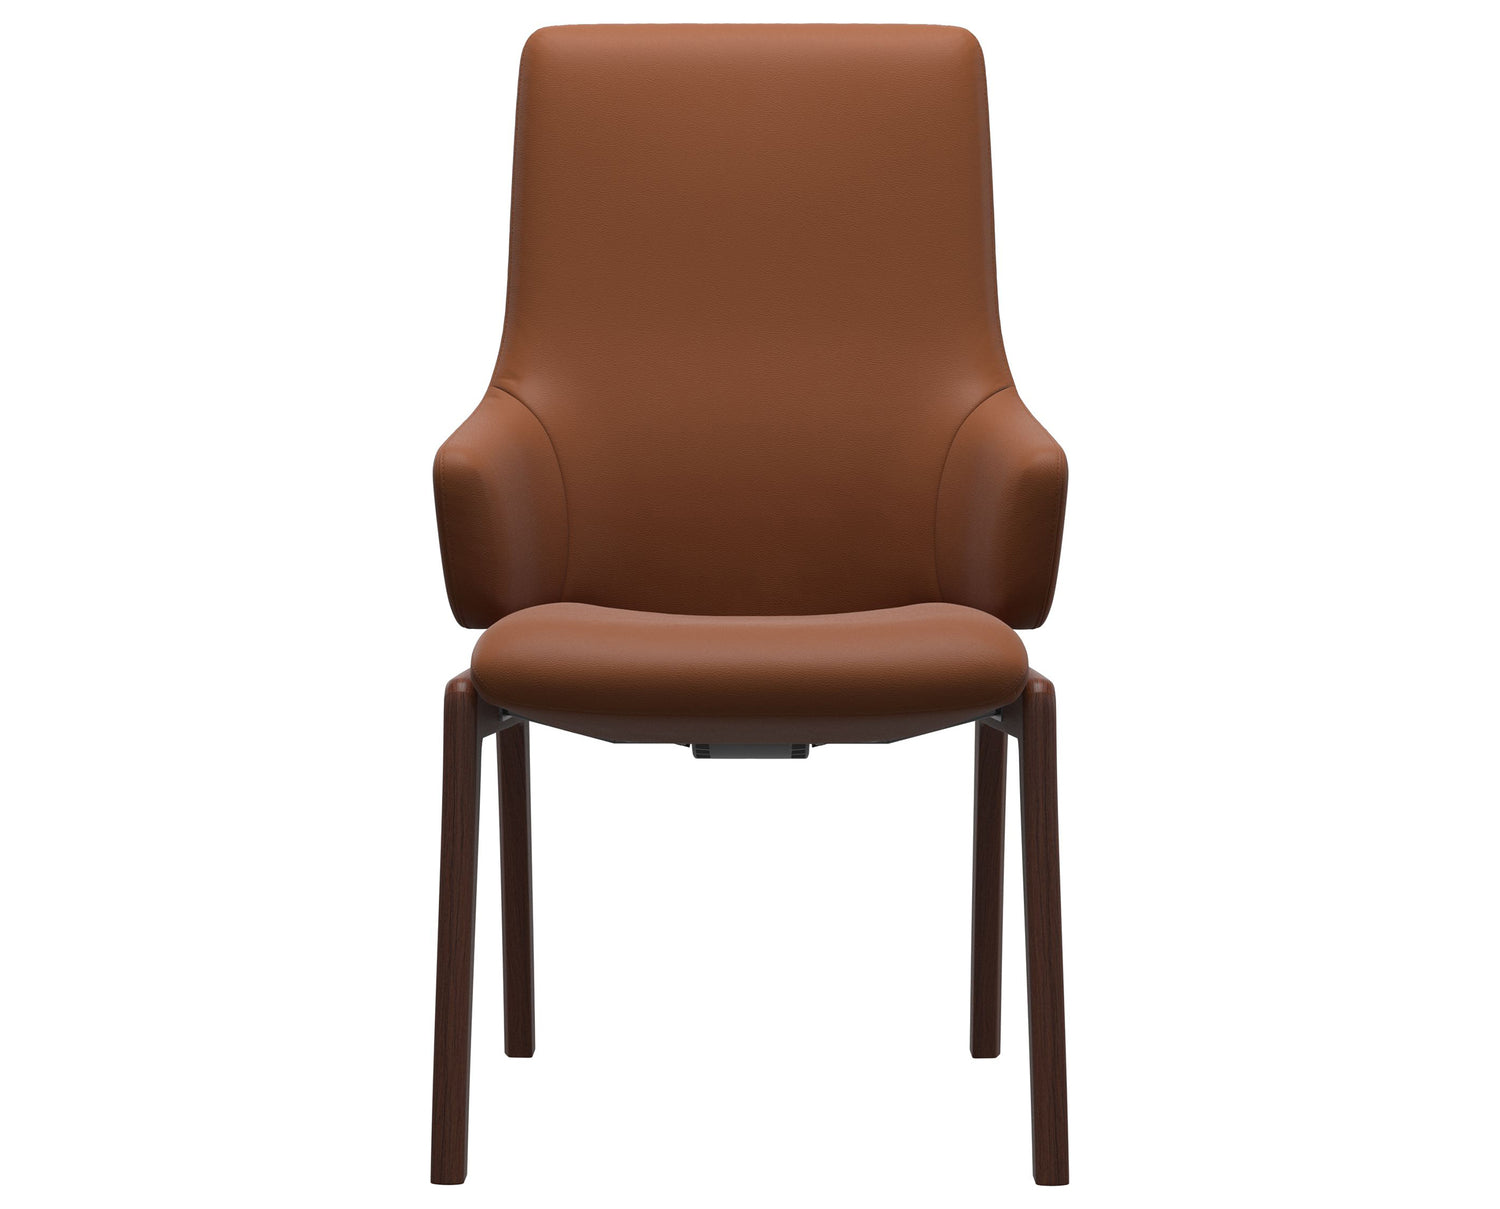 Paloma Leather New Cognac & Walnut Base | Stressless Laurel High Back D100 Dining Chair w/Arms | Valley Ridge Furniture